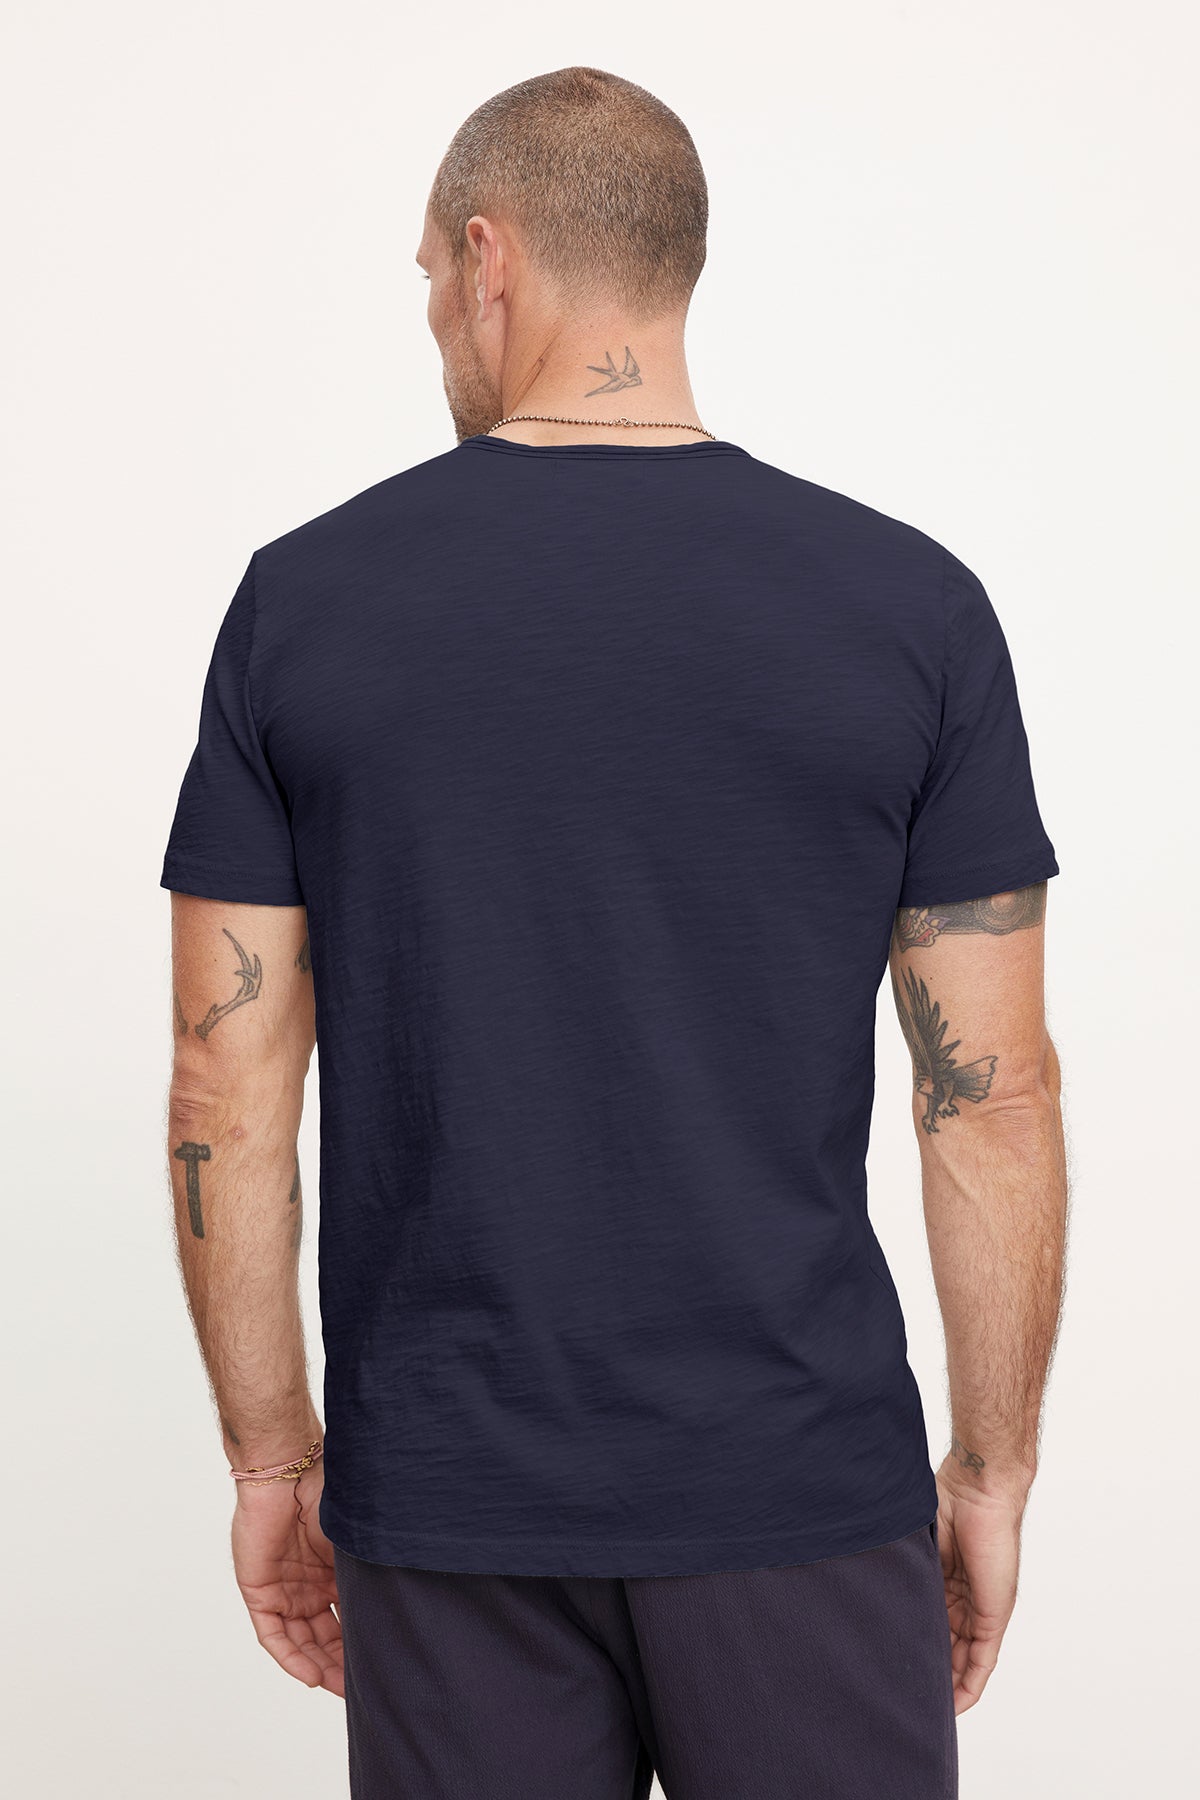   Rear view of a man wearing a Velvet by Graham & Spencer Chad Tee, displaying multiple arm tattoos and a neck tattoo. 